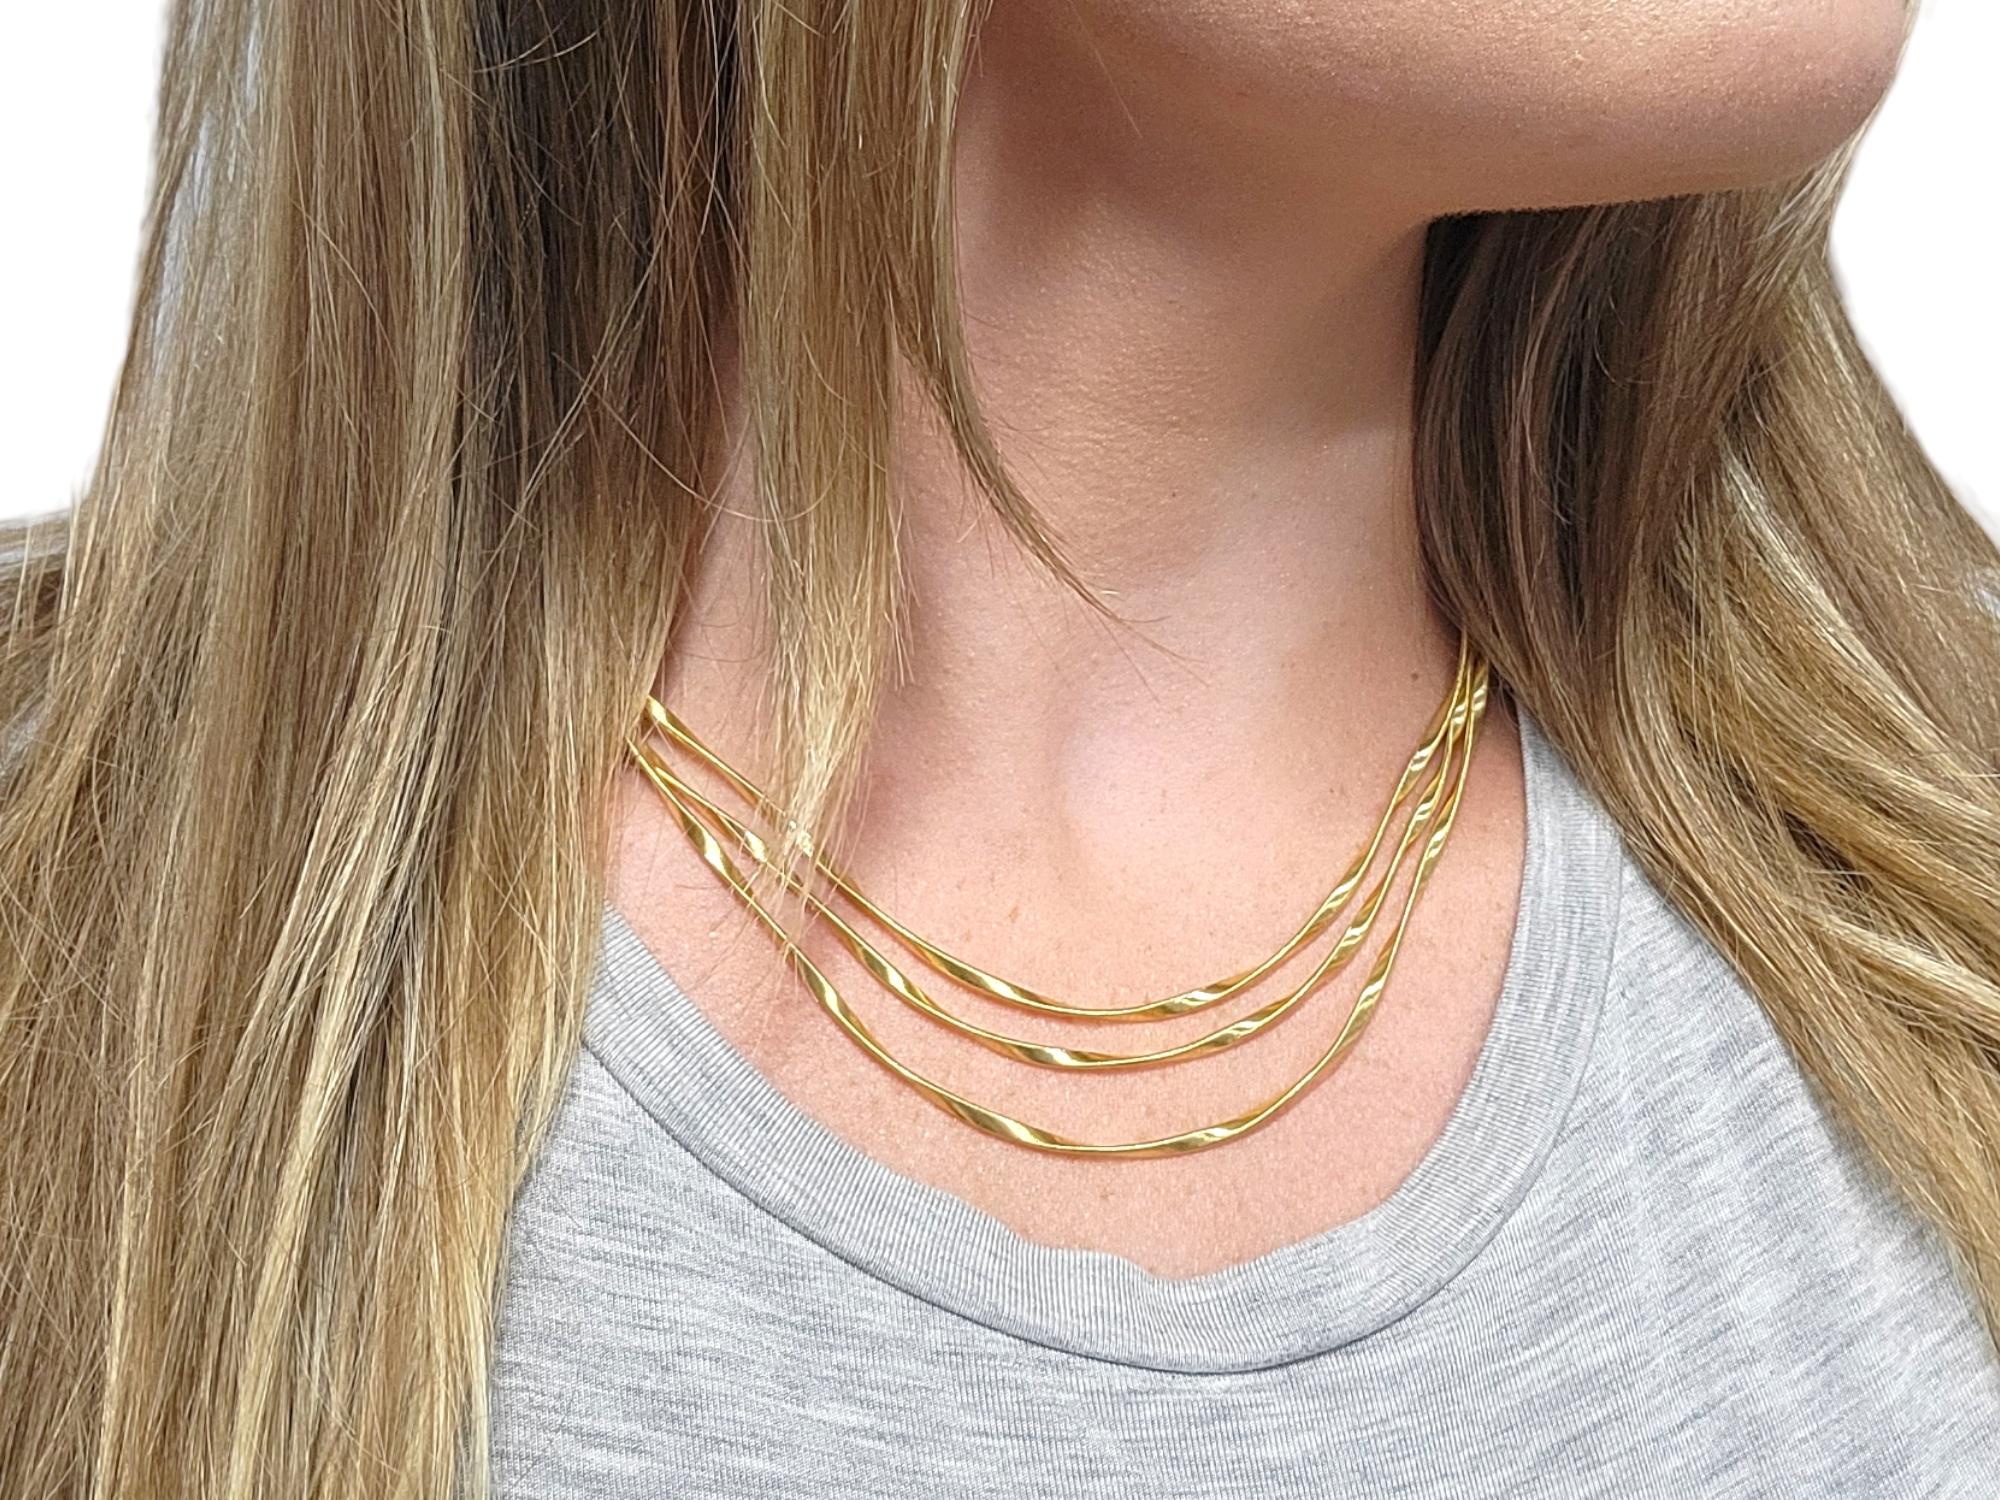 MarCo Bicego Marrakech Collection Three-Strand Necklace in 18 Karat Yellow Gold For Sale 5